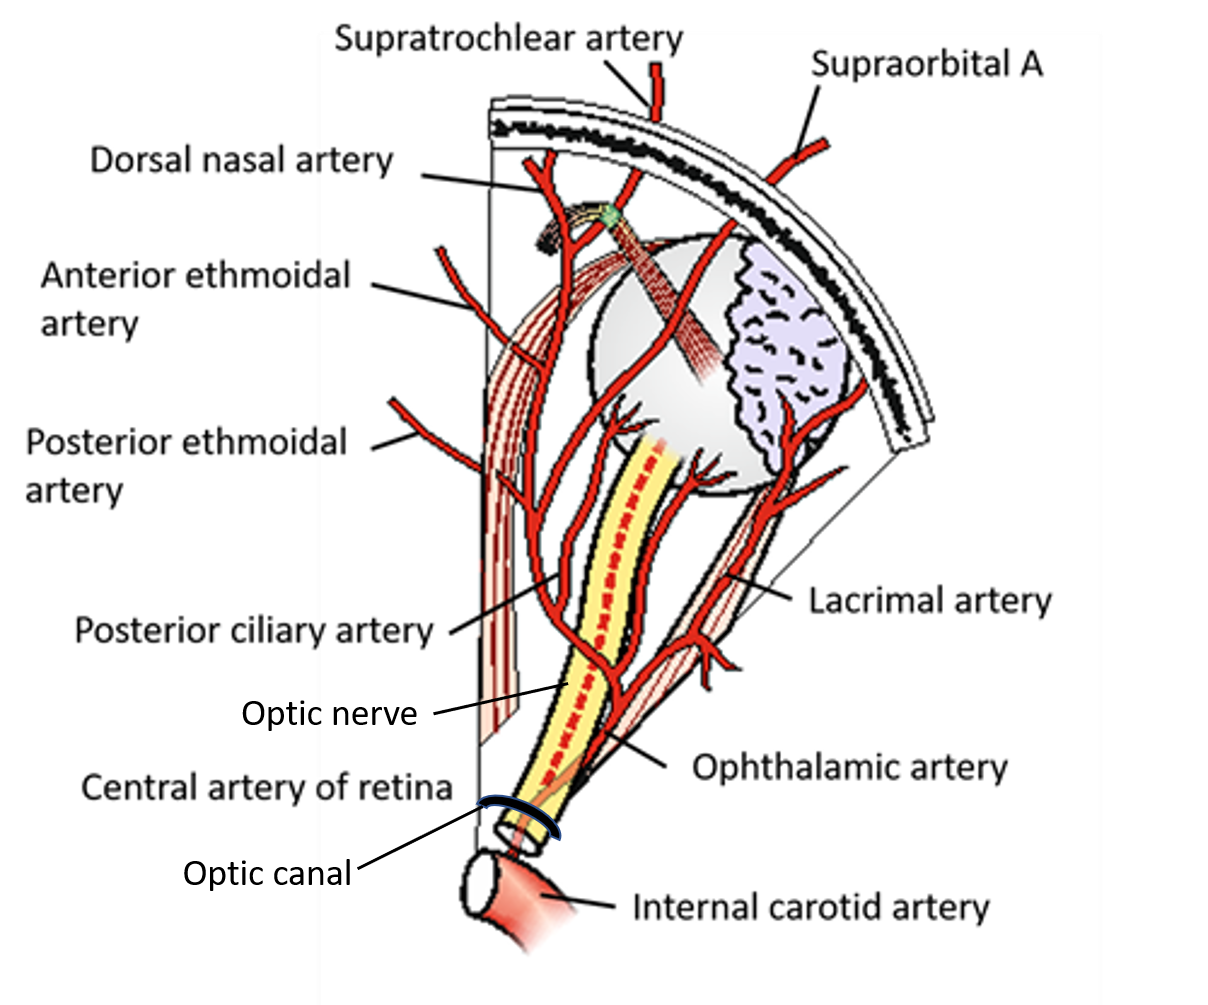 ophthalmic artery - branches